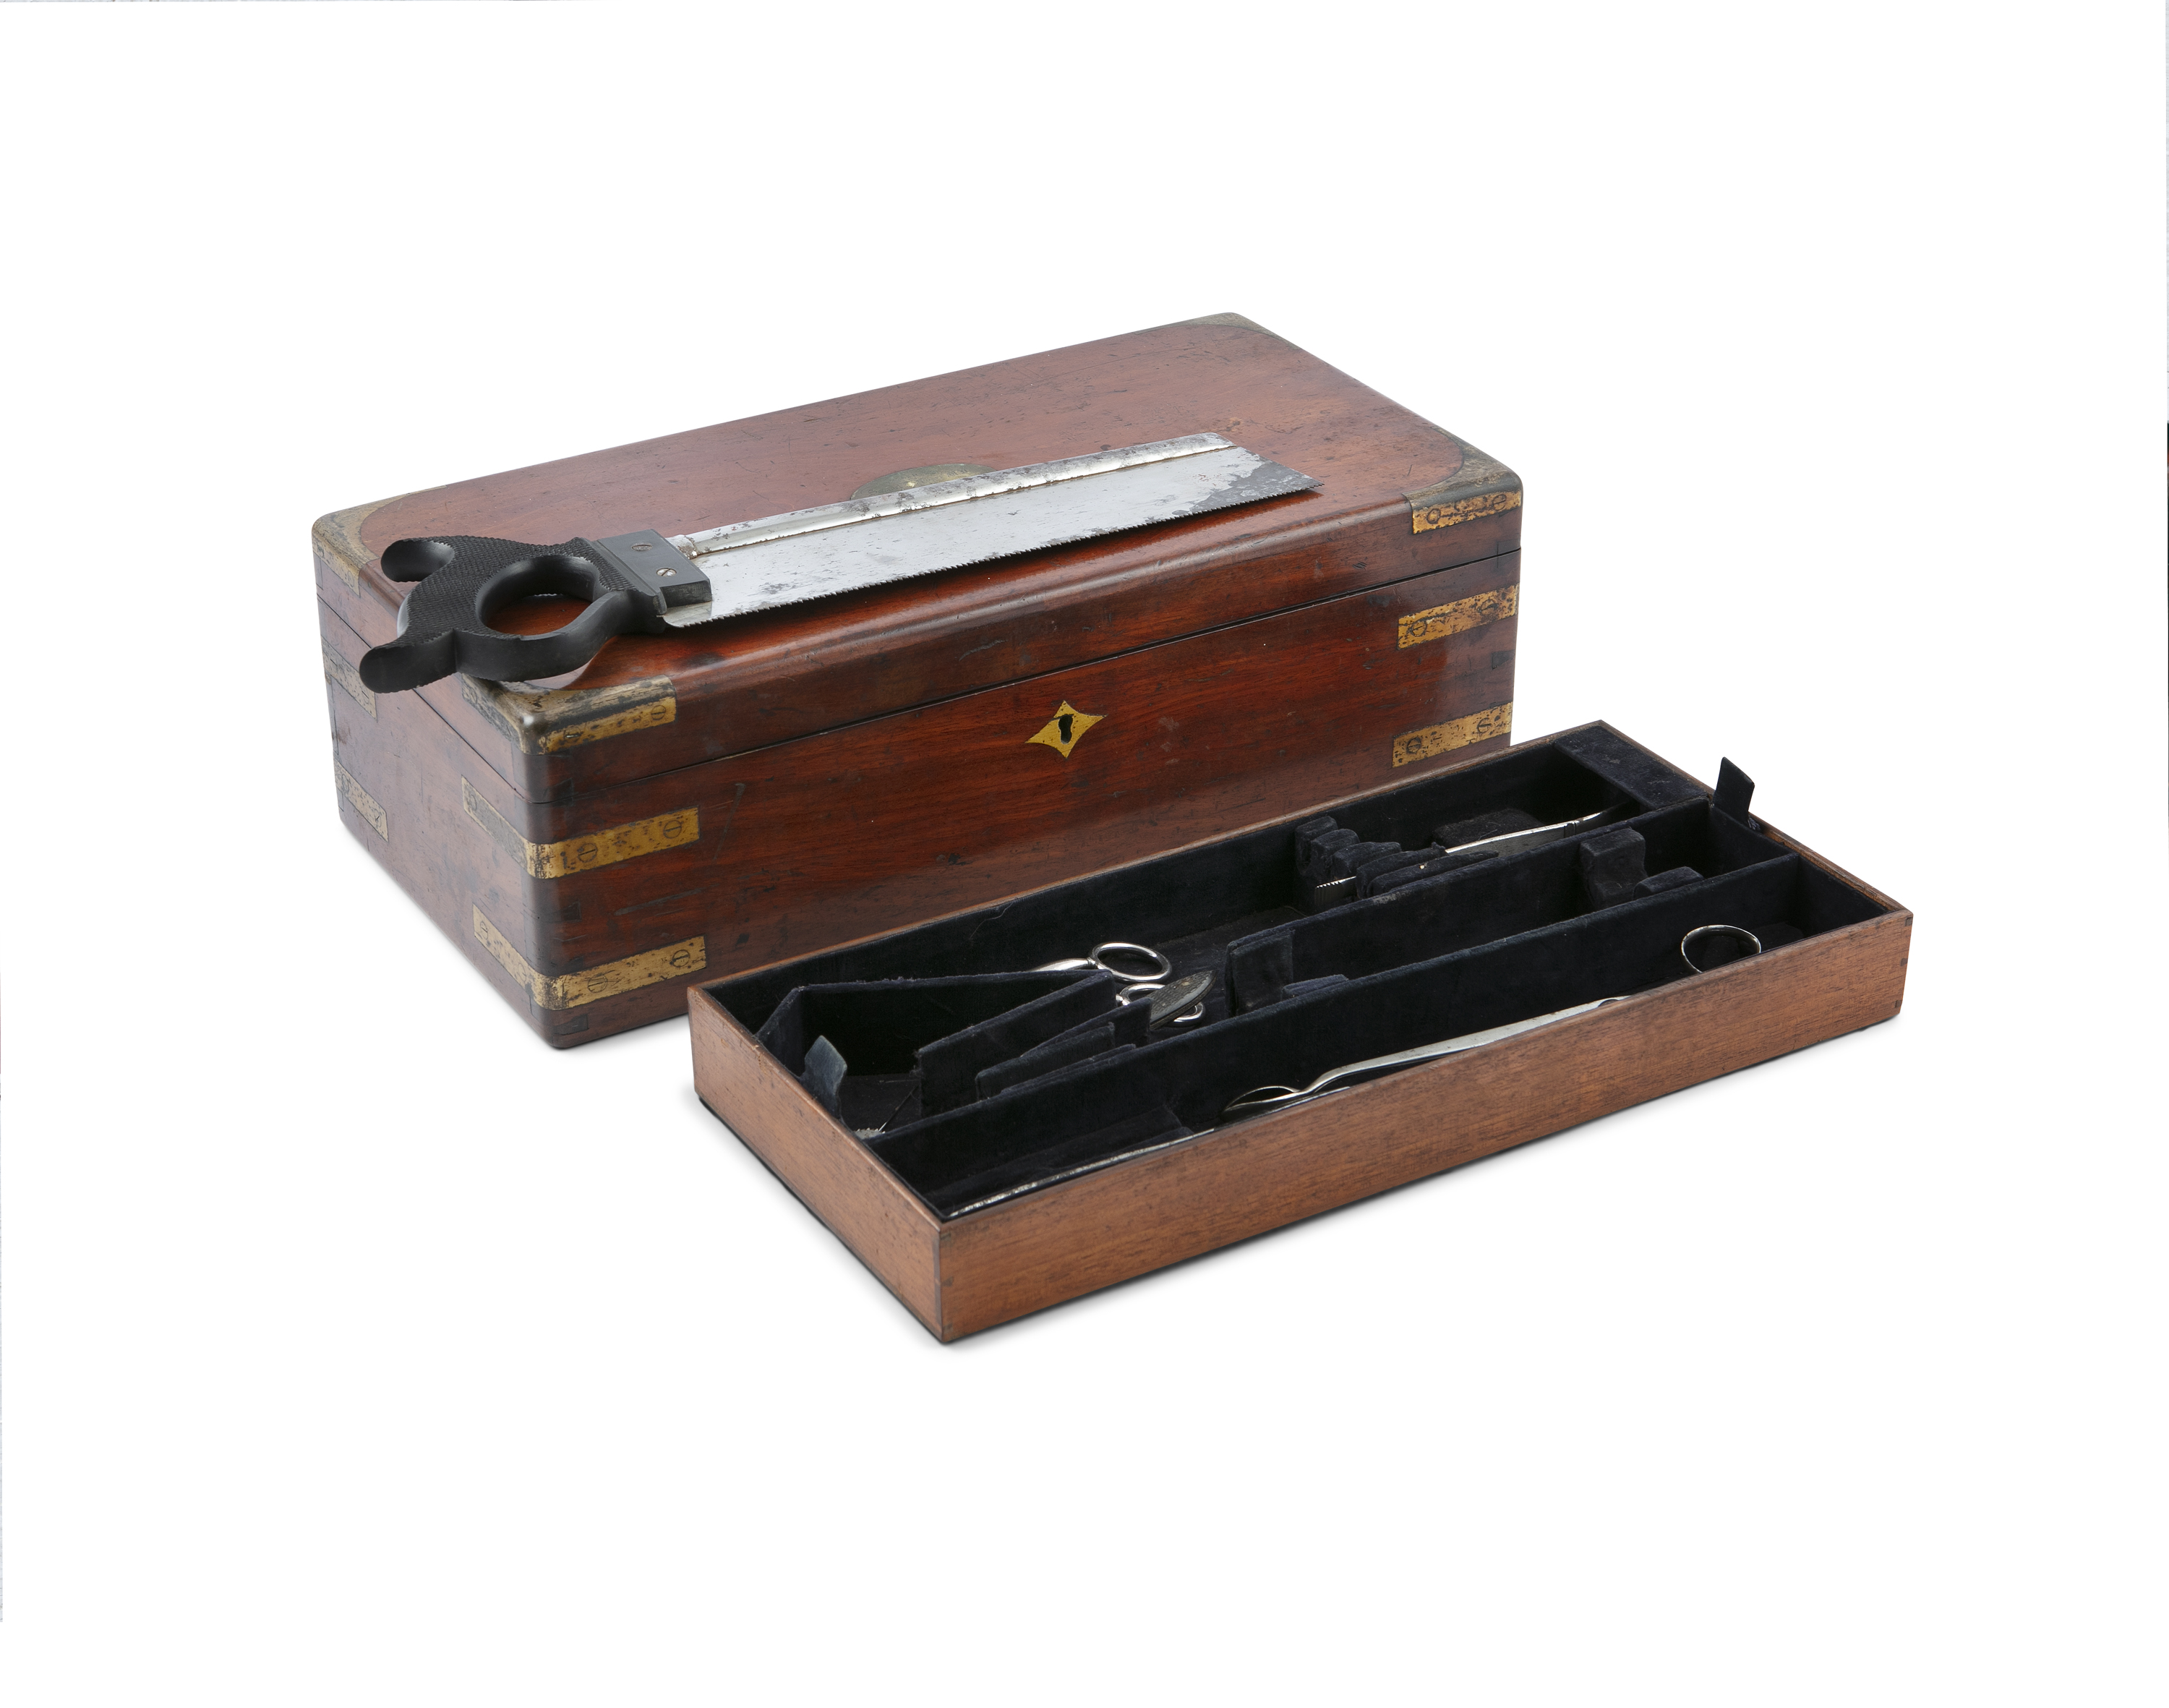 AN AMERICAN MAHOGANY AND BRASS BOUND SURGICAL BOX, 19th century, presented to Samuel Moore, M.D